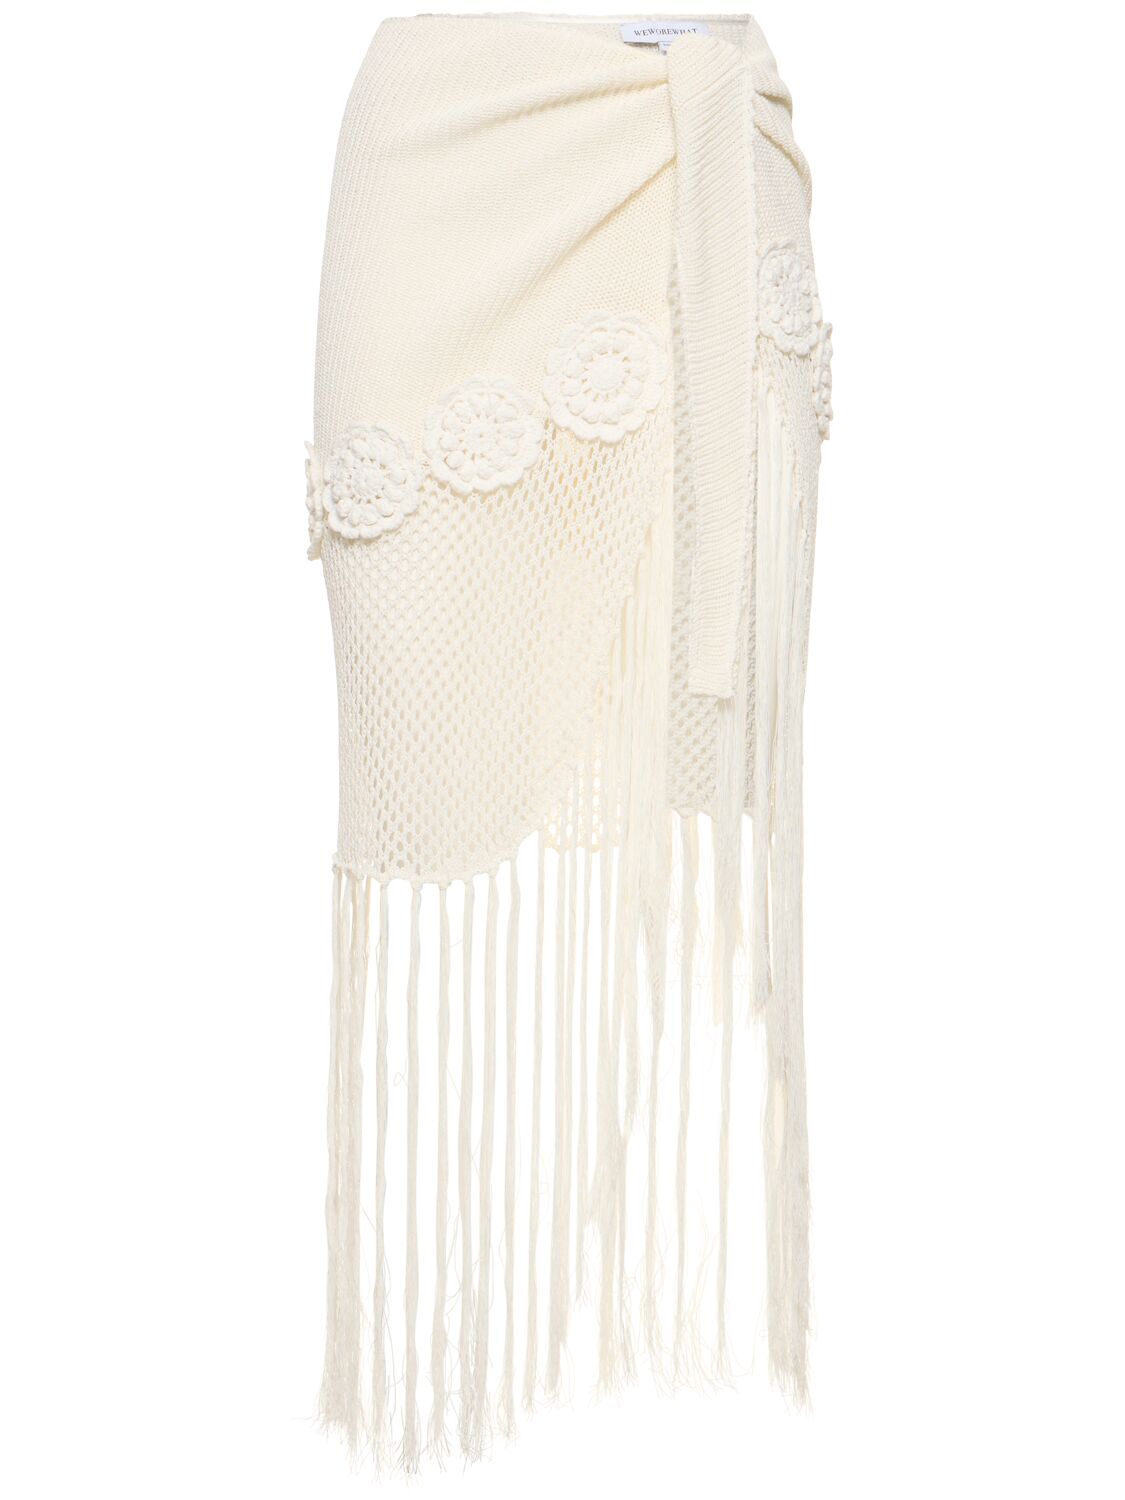 Shop Weworewhat Fringed Crochet Cotton Blend Sarong In White